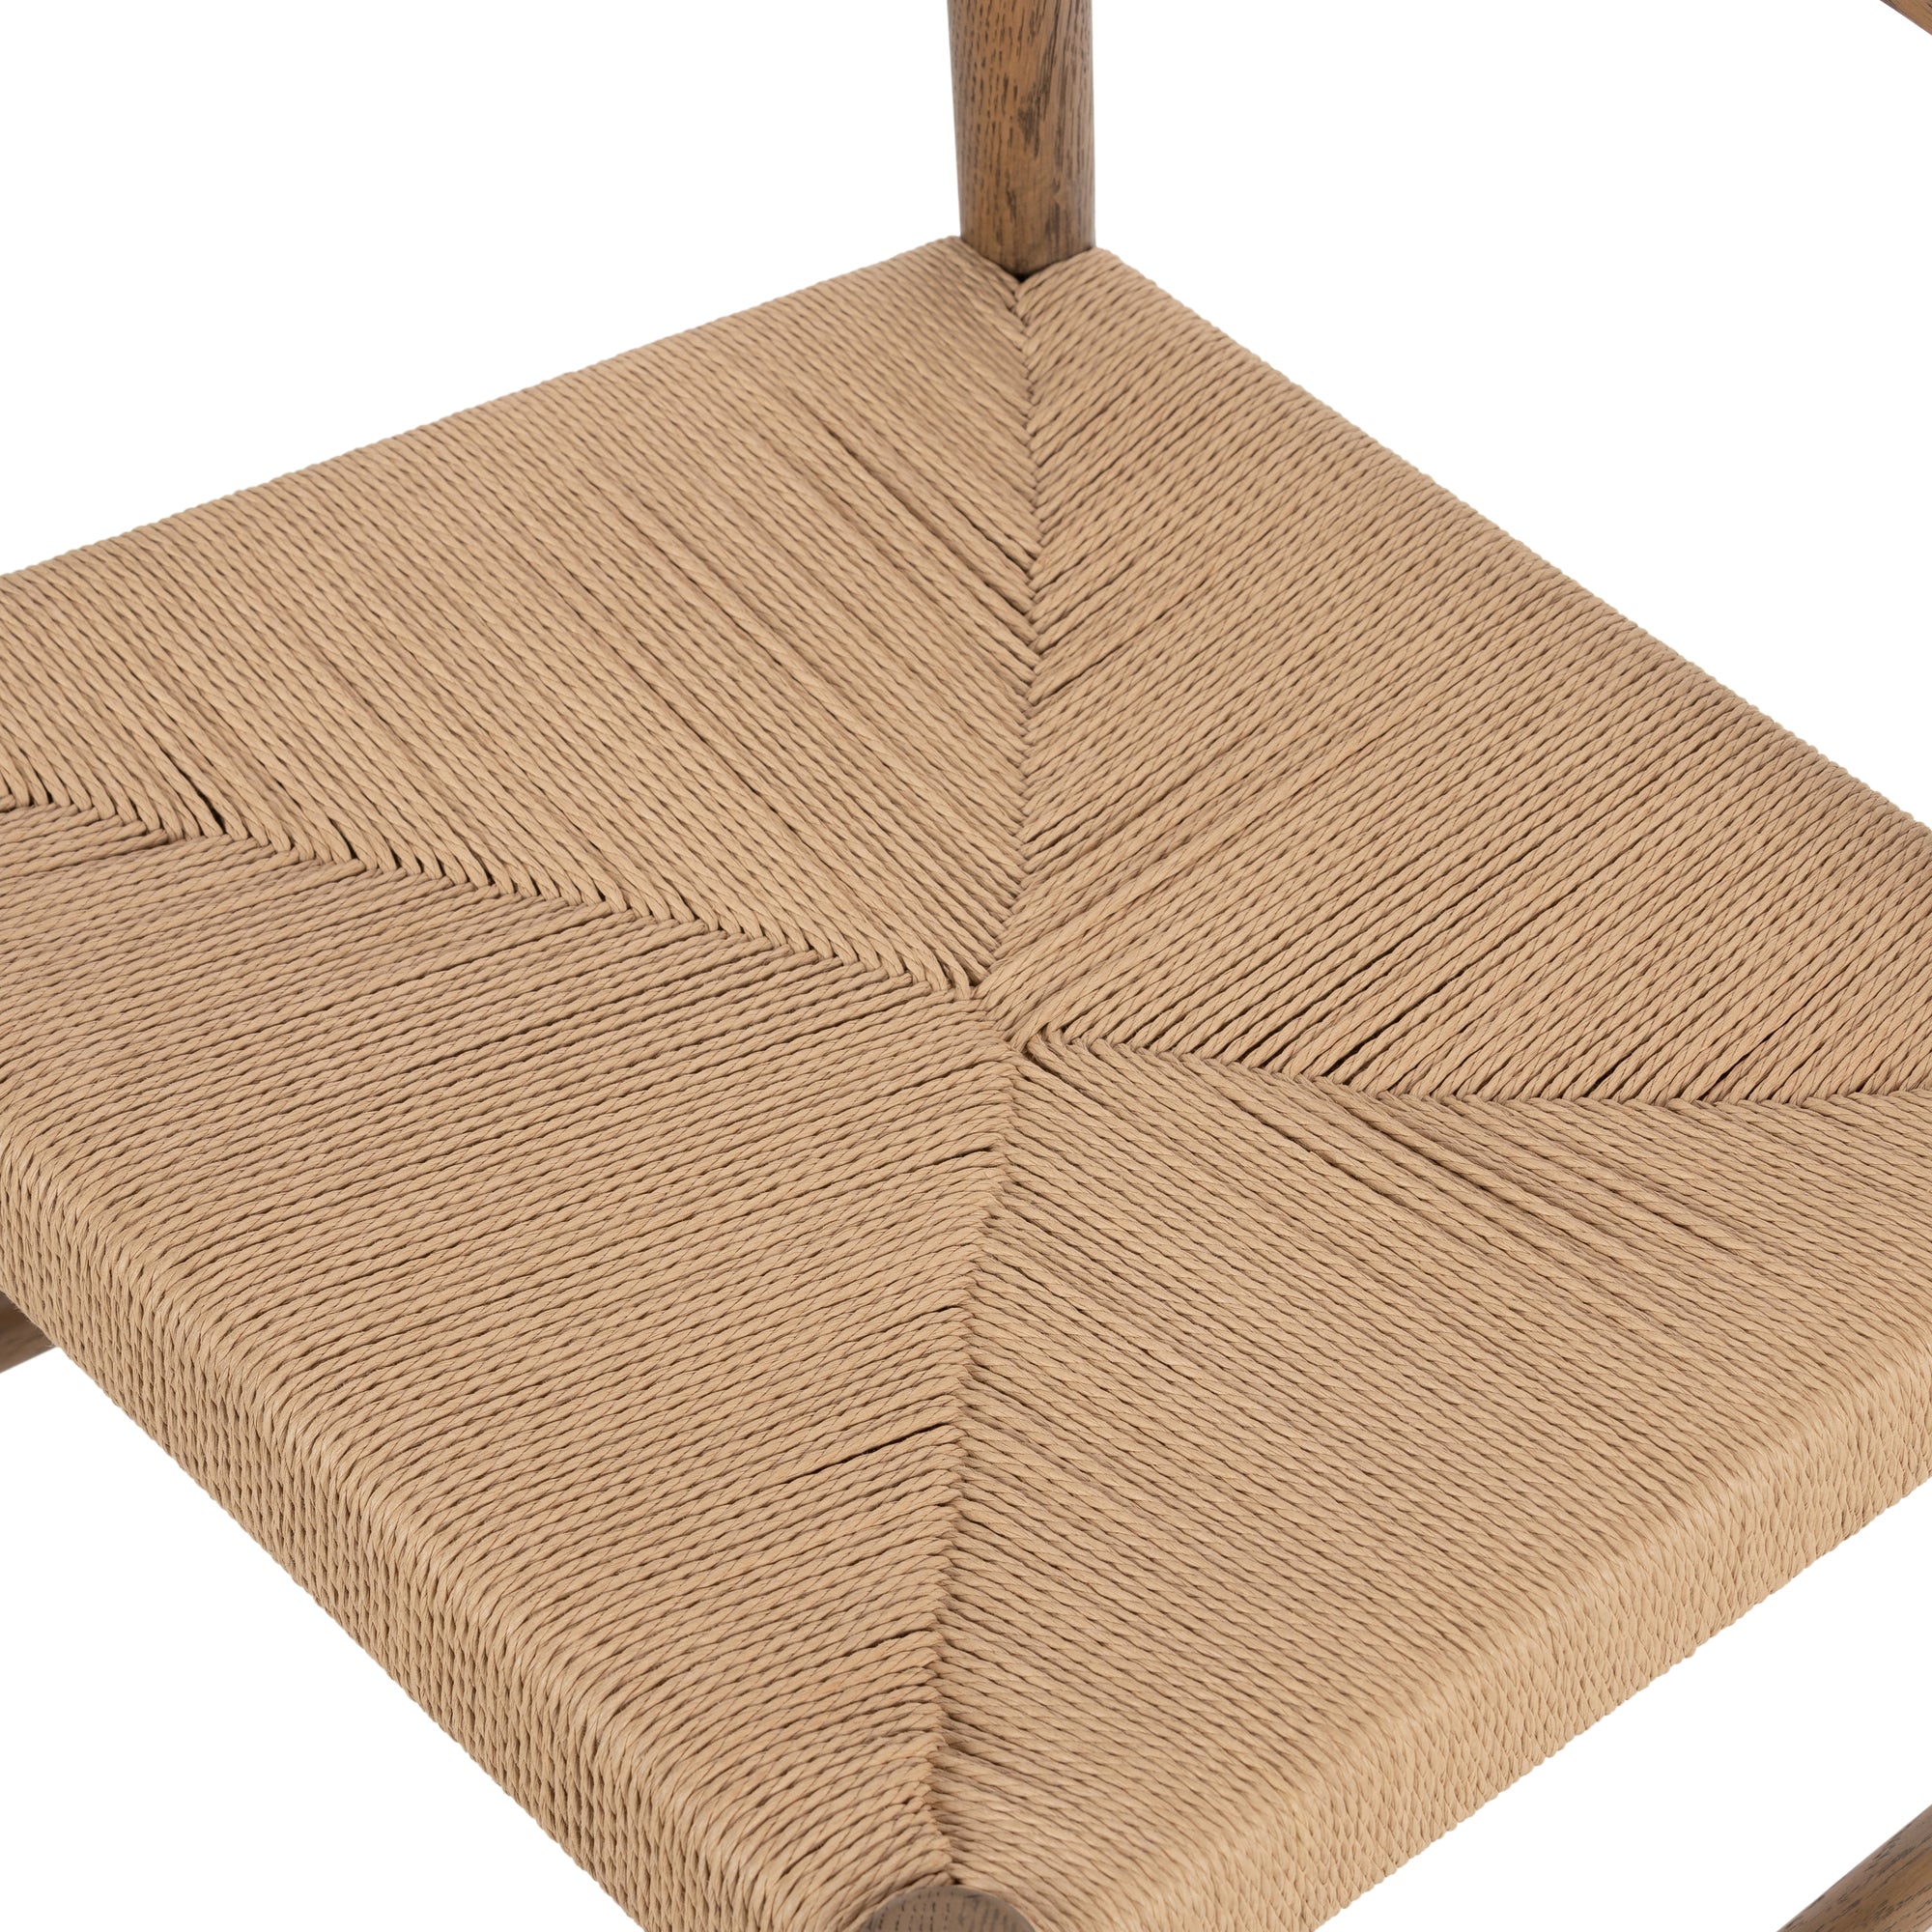 Mandy  Woven Dining Chair